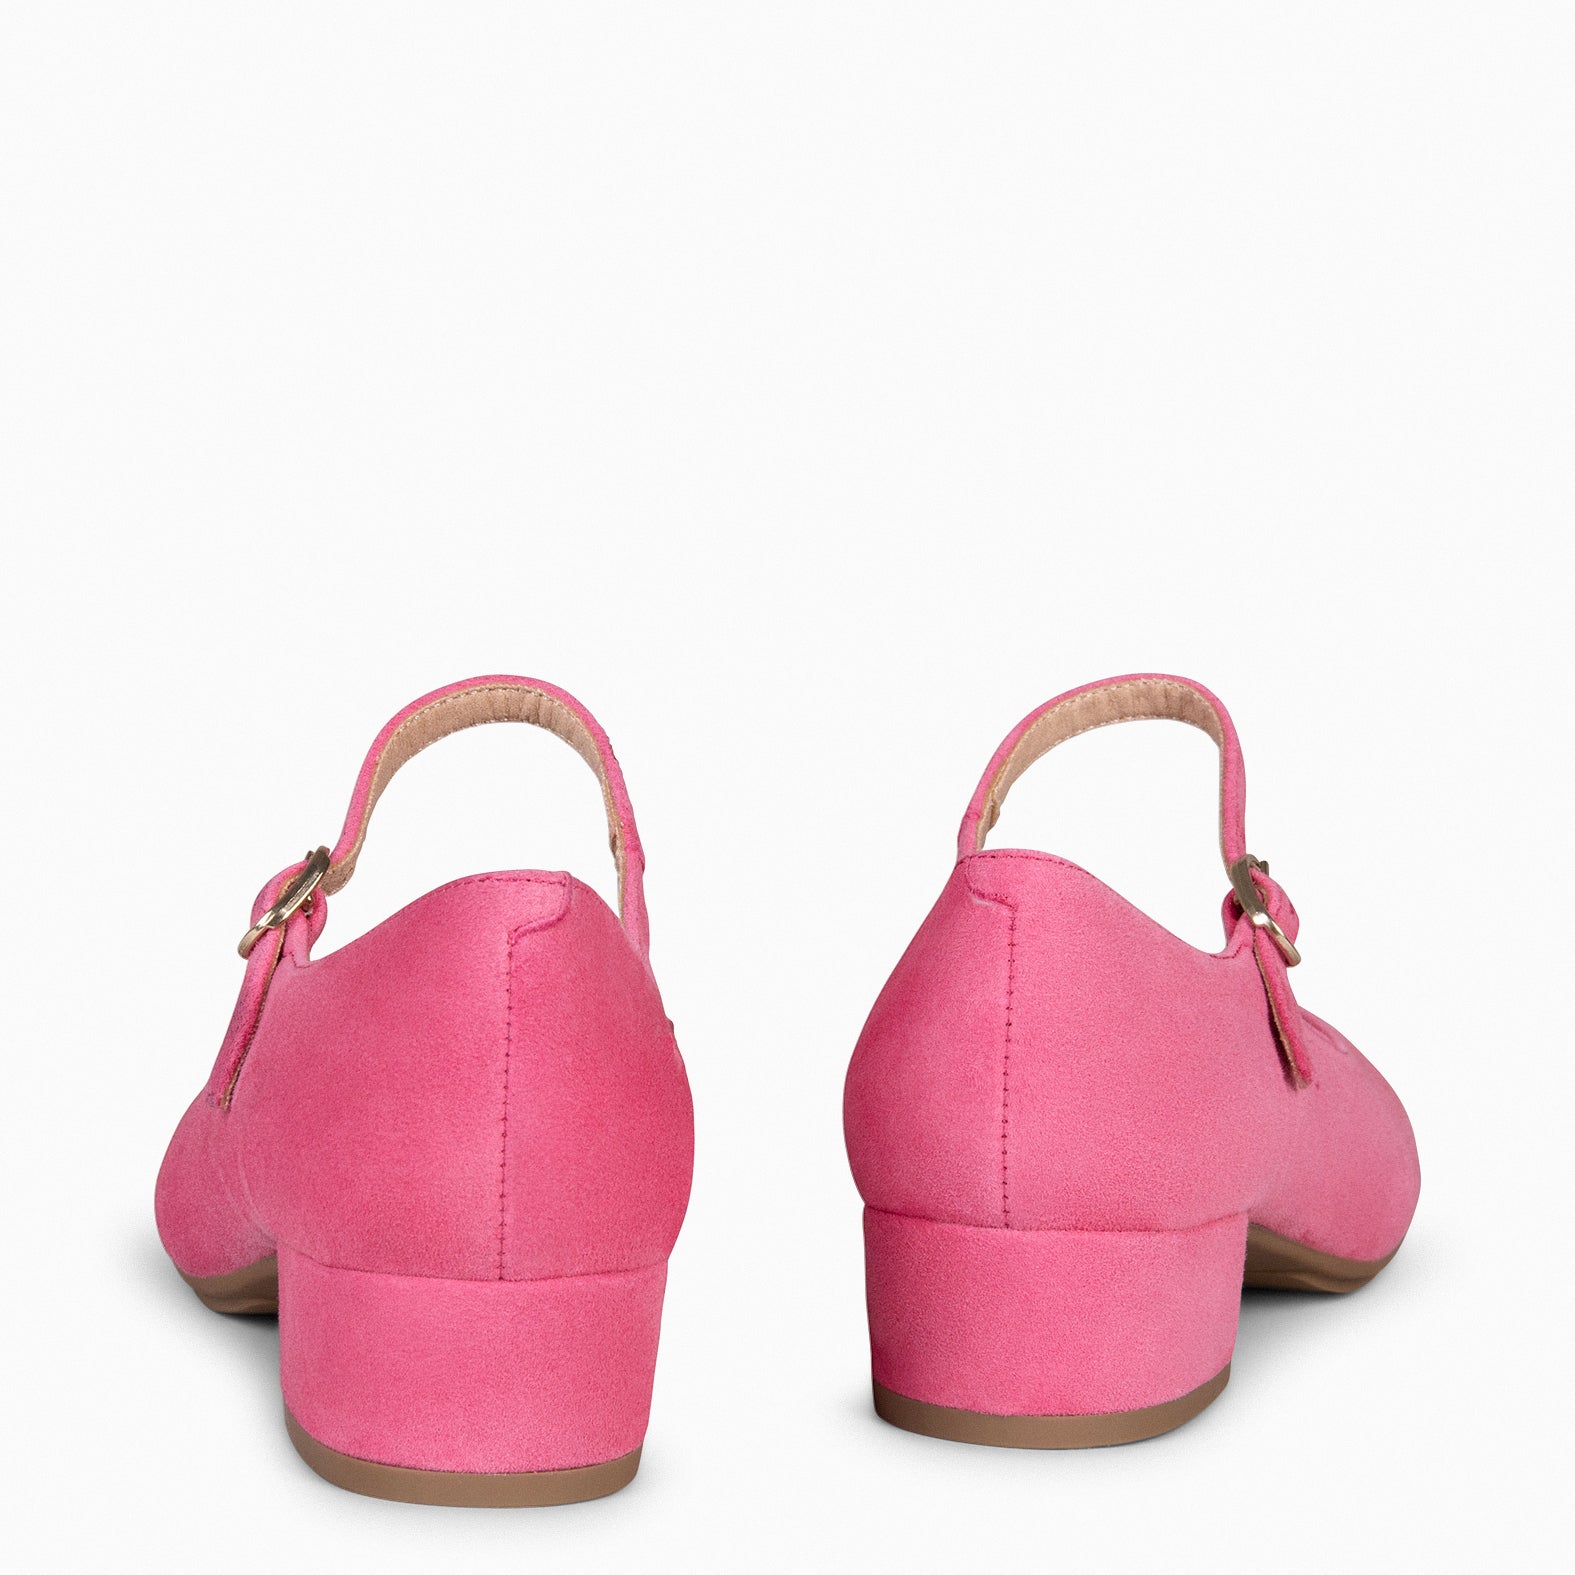 NORA – PINK Mary-Janes with low heel 